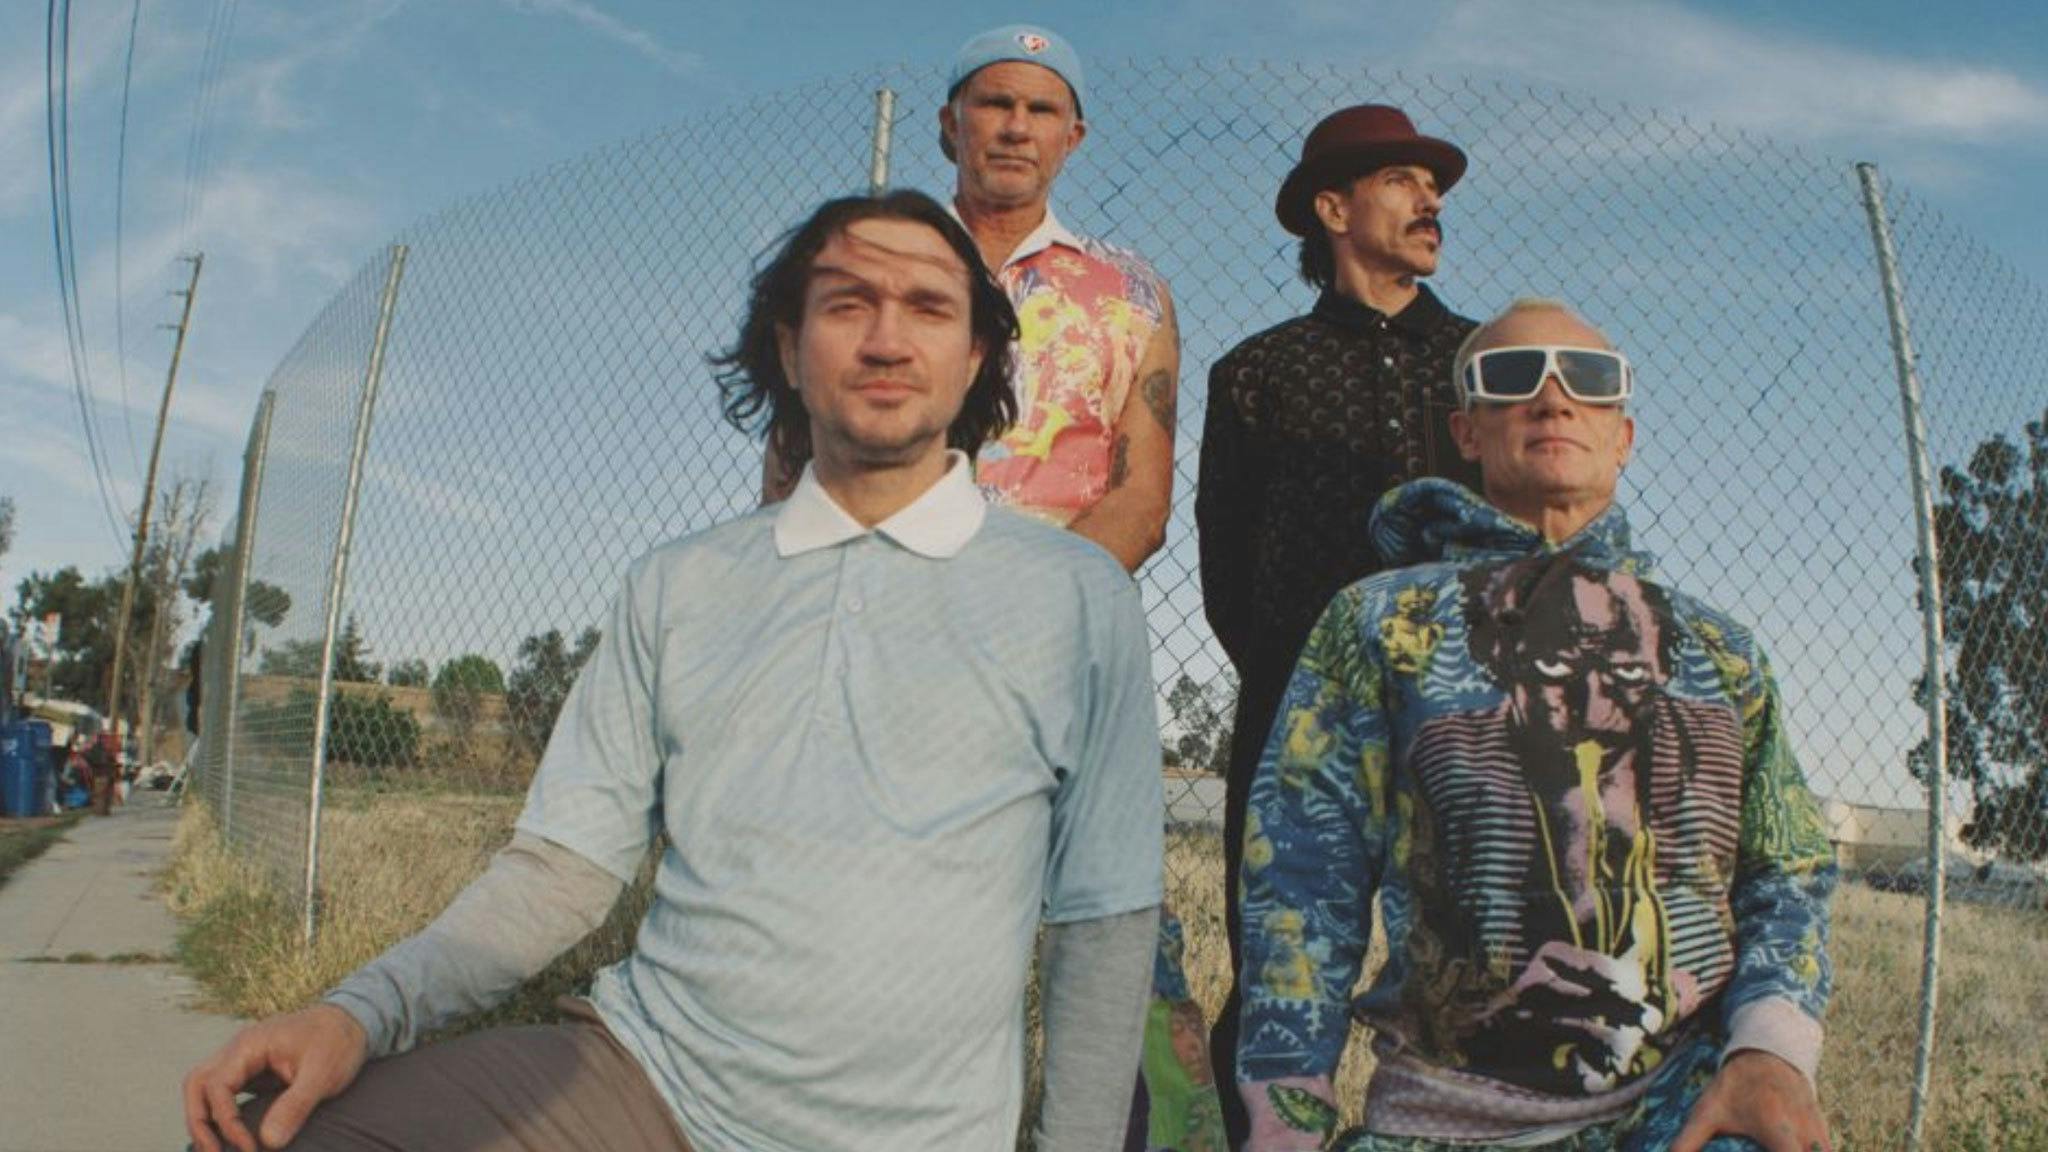 Red Hot Chili Peppers, Smashing Pumpkins and more to headline BottleRock Napa Valley 2023